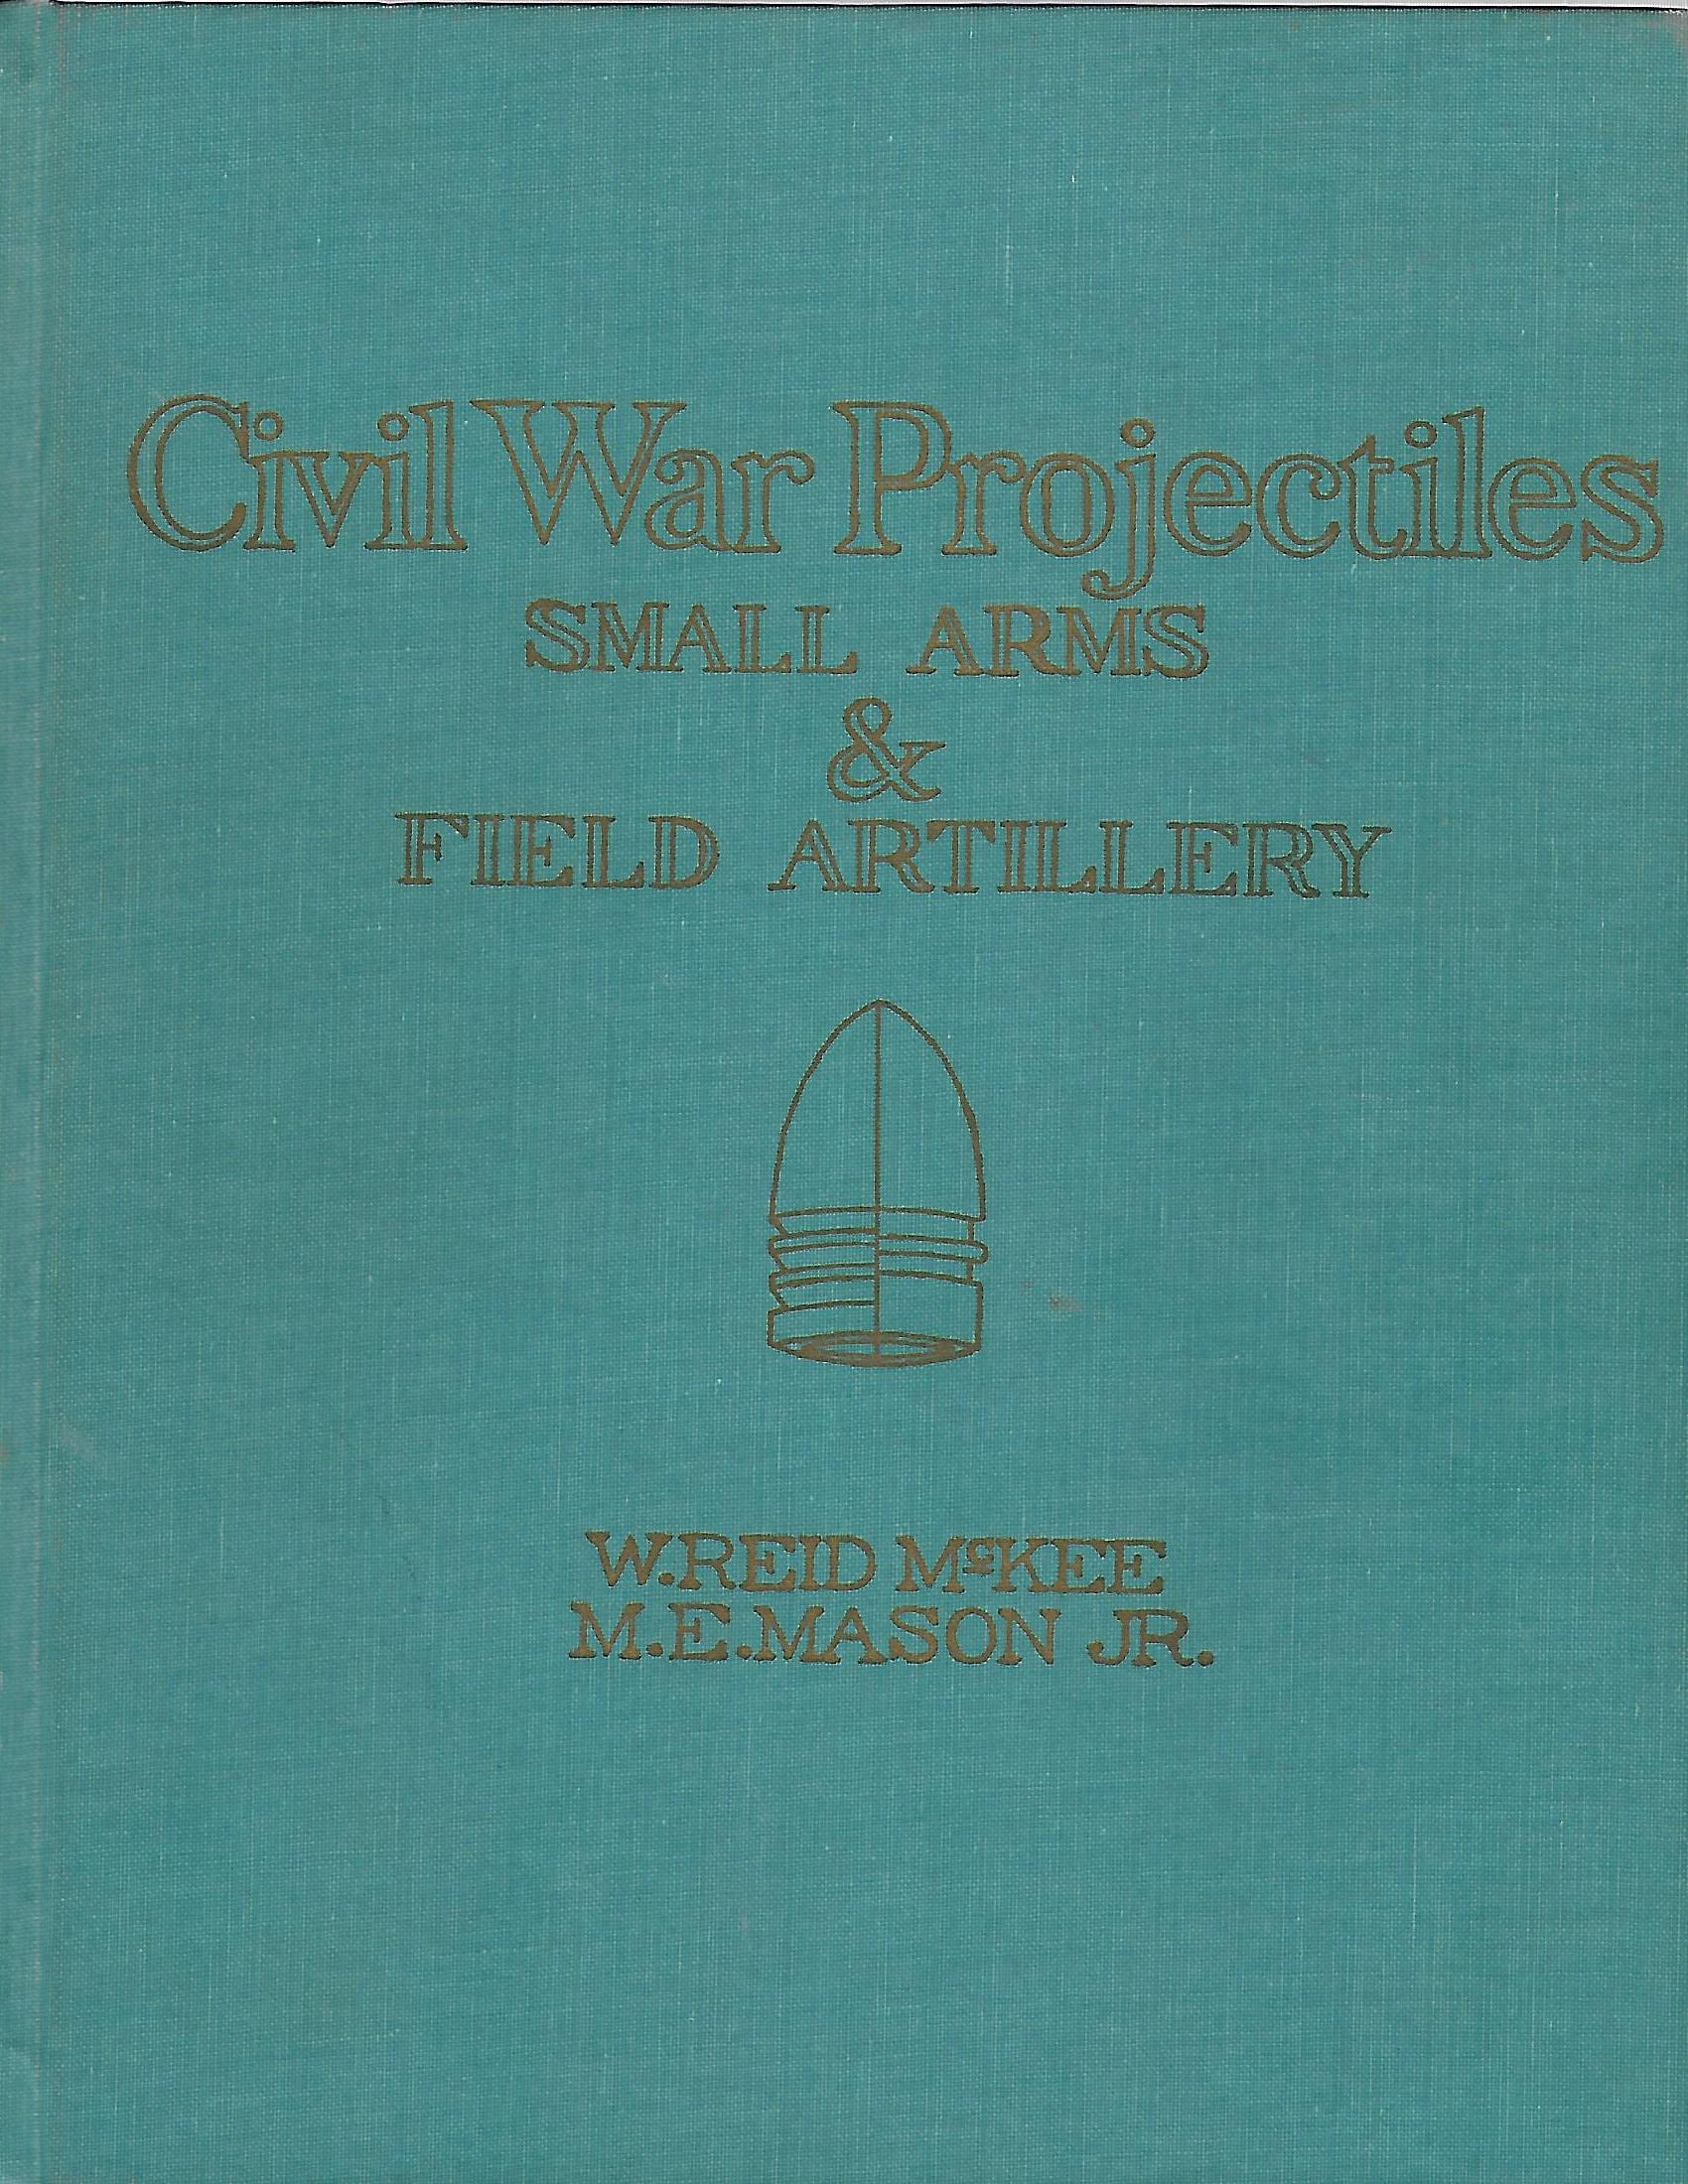 A weapon and projectile similar to arkhalis · Issue #3376